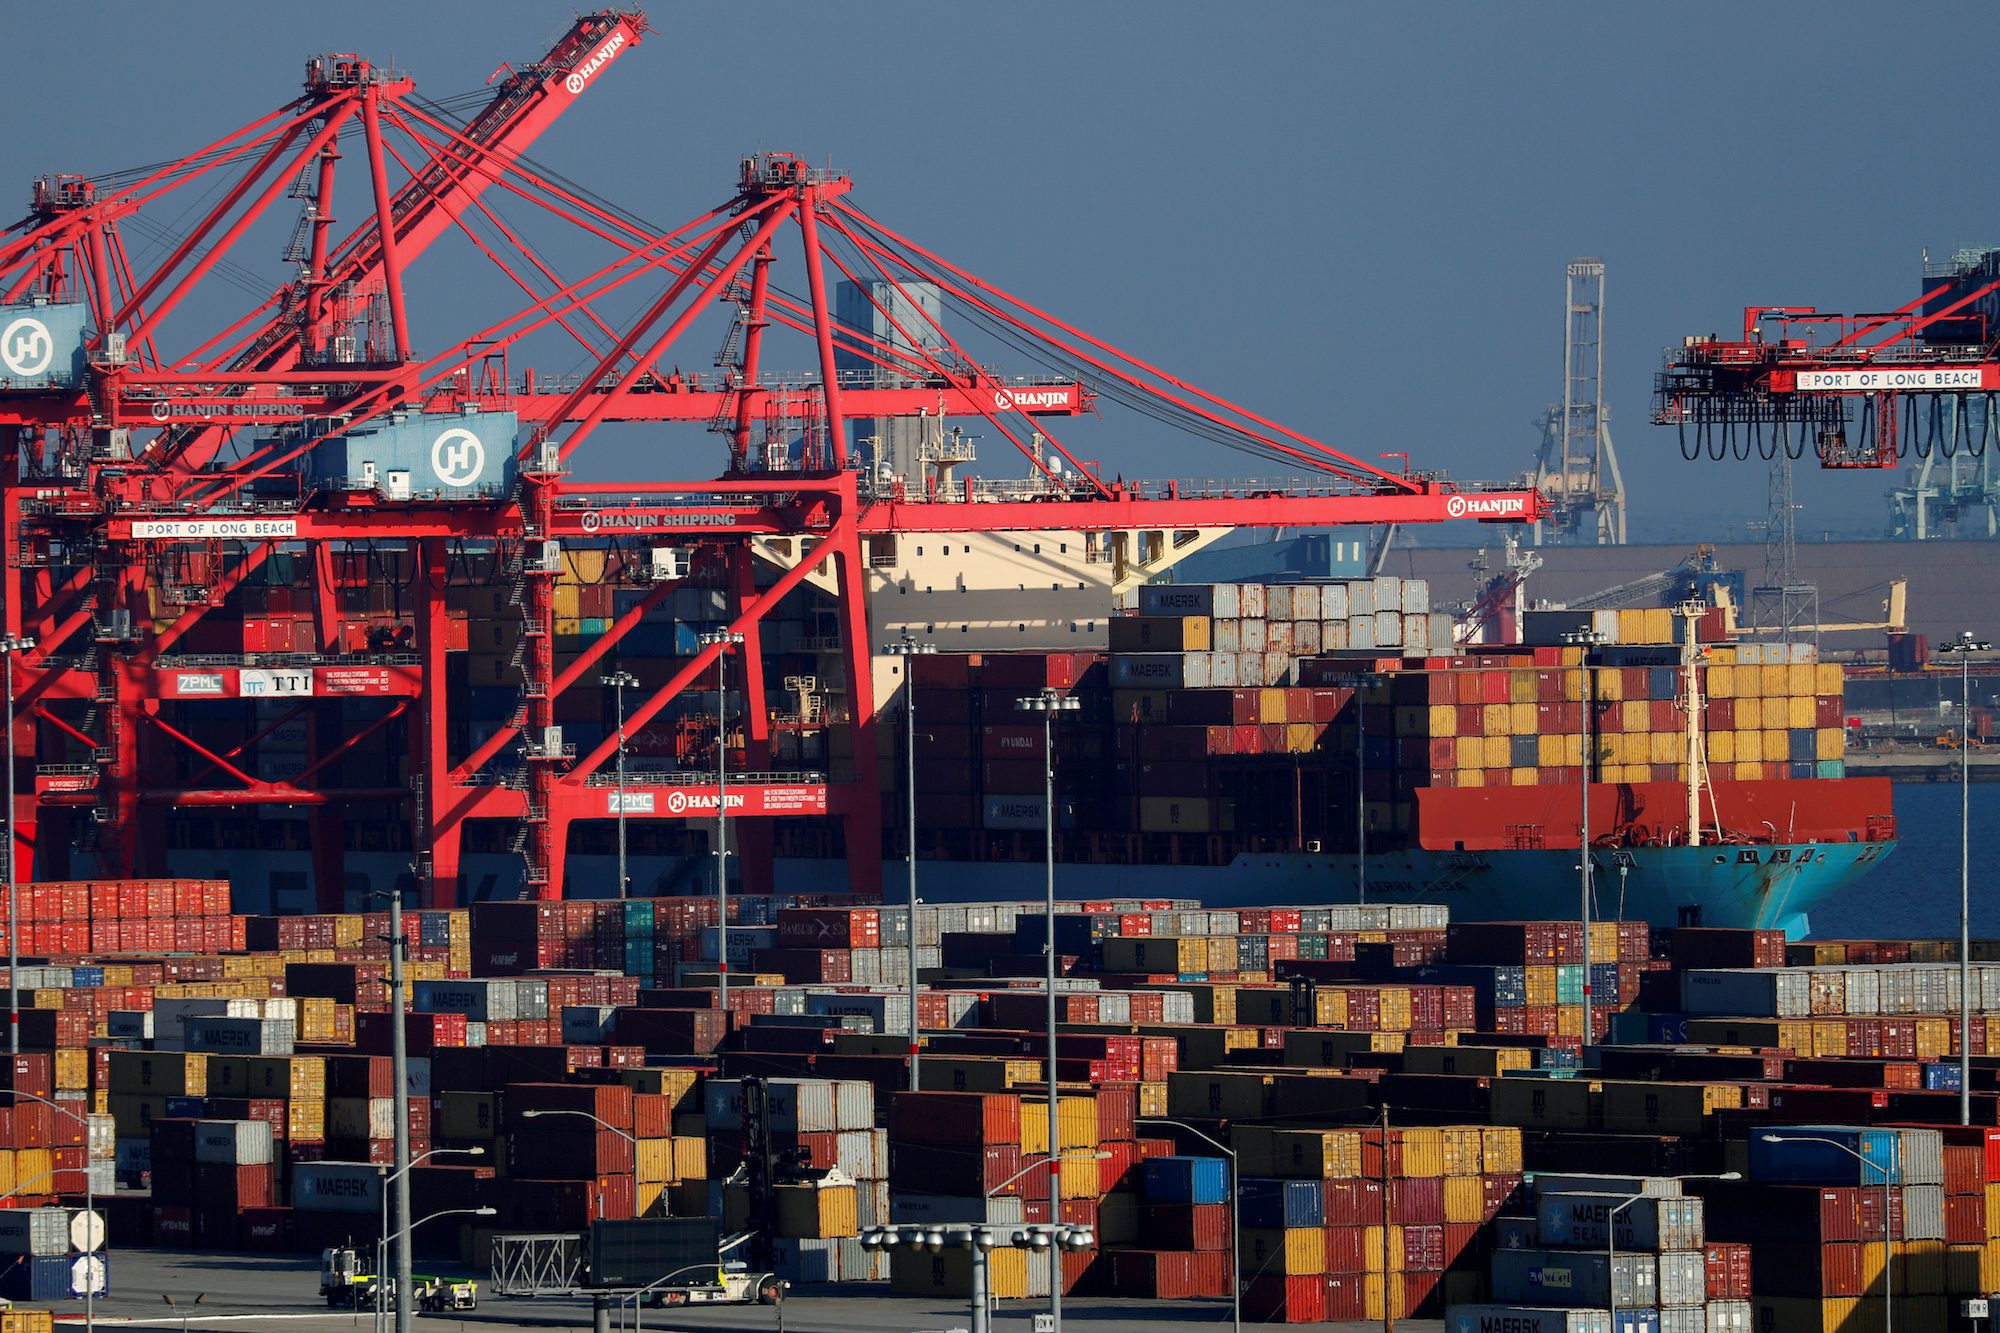 FILE PHOTO: Ships and shipping containers are pictured at the port of Long Beach in Long Beach, California, U.S., January 30, 2019. REUTERS/Mike Blake/File Photo